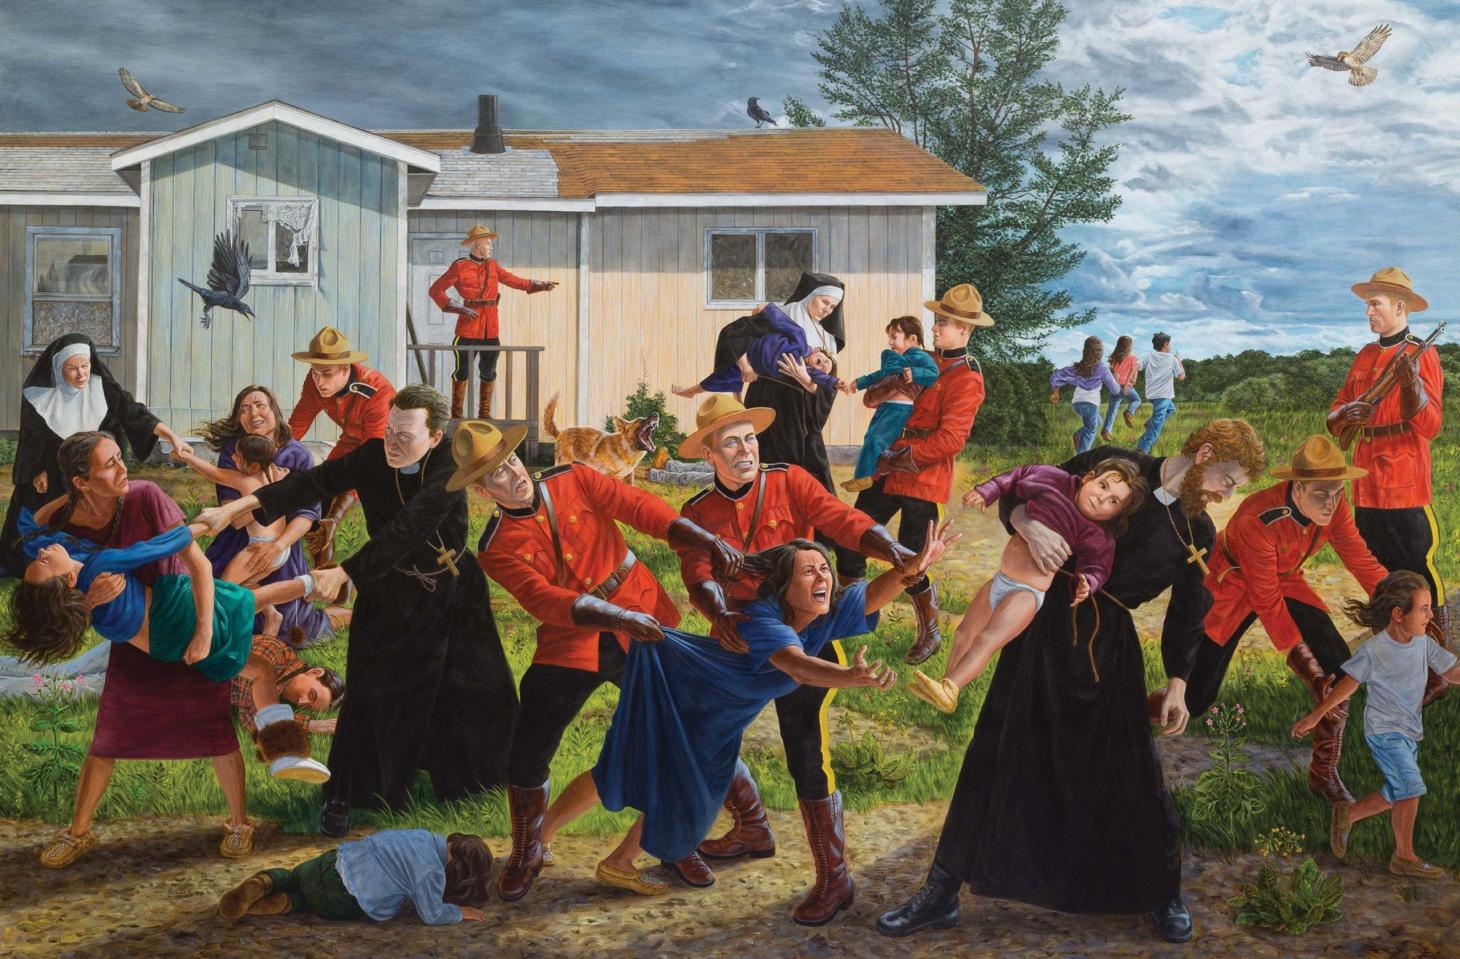 The Scream. By Kent Monkman, 2017. Acrylic on canvas, 84” x 126”. Collection of the Denver Art Museum, Native Arts acquisition fund.